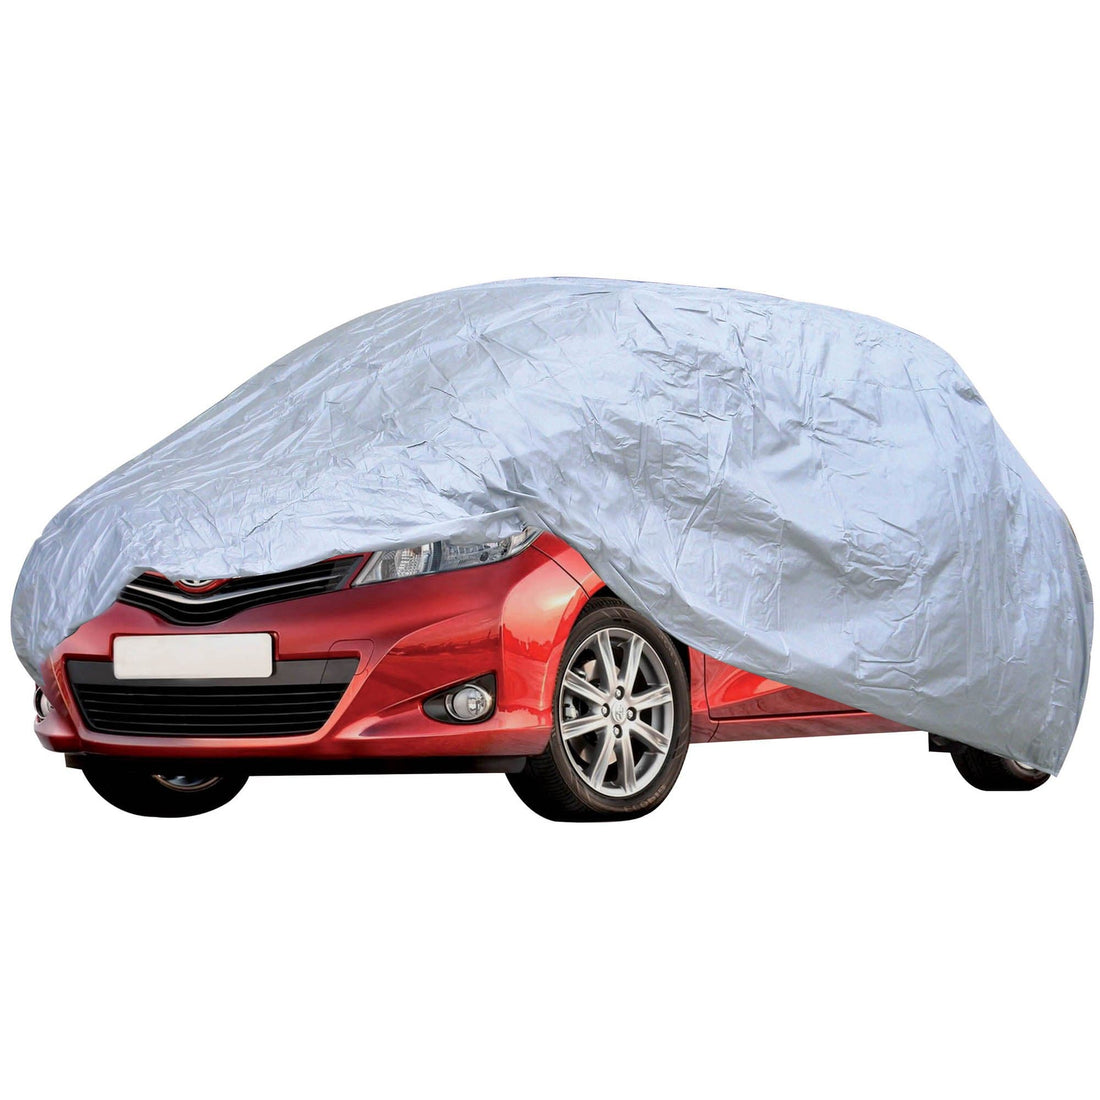 WATERPROOF CAR COVER SIZE M